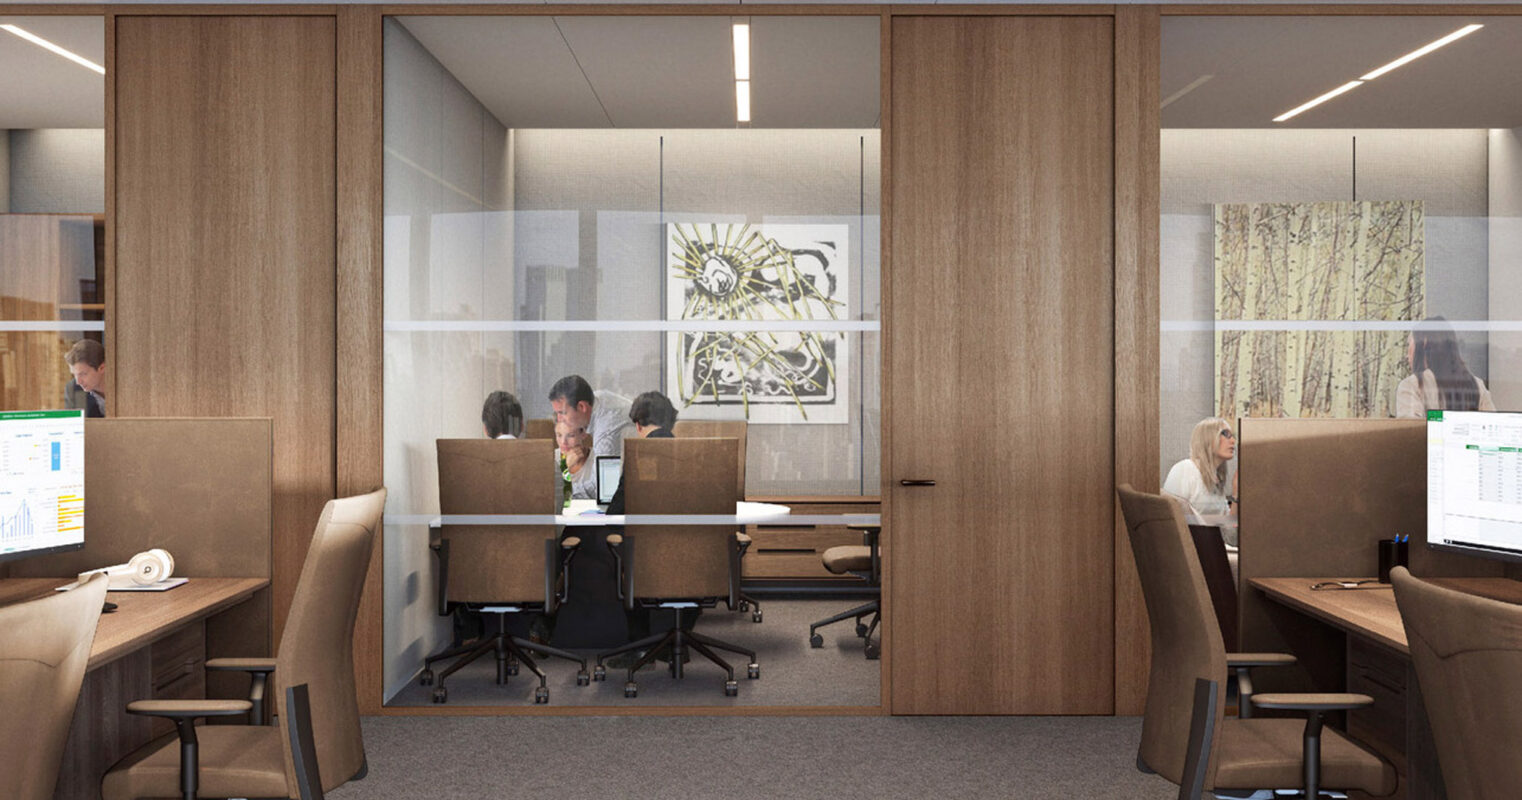 Contemporary office space with glass partition walls and wood veneer frames, providing semi-privacy. Ergonomic chairs accompany modular workstations. A wall-mounted abstract art piece complements the natural wood tones, enhancing the space's professional and polished ambiance.